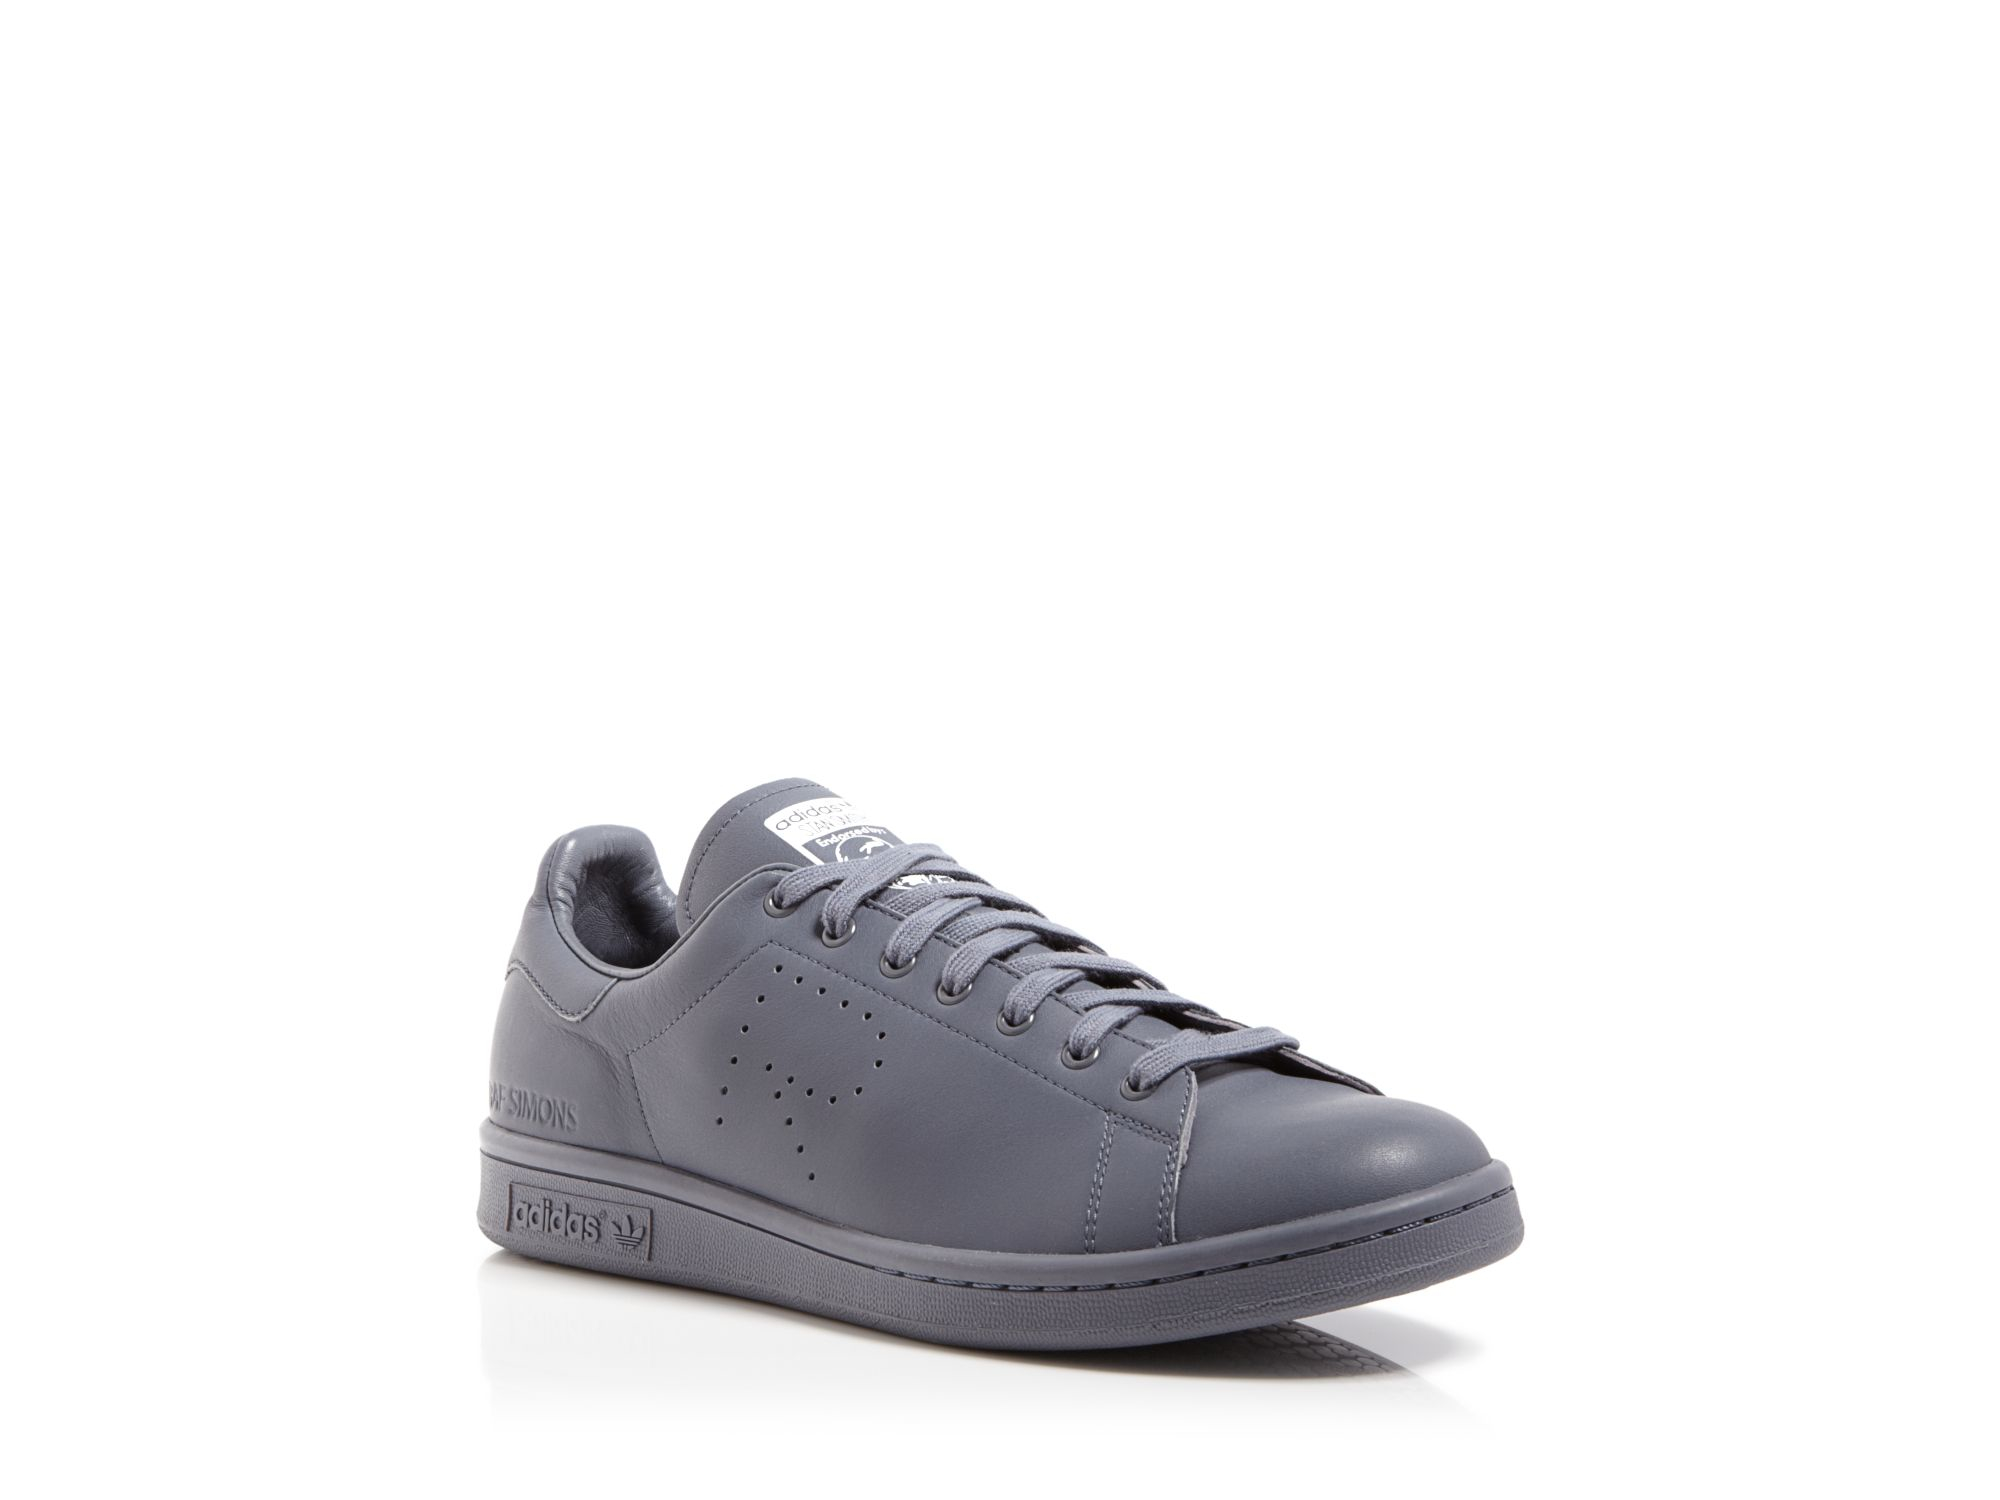 smuggling Planting trees beard adidas By Raf Simons Stan Smith Leather Sneakers in Gray | Lyst